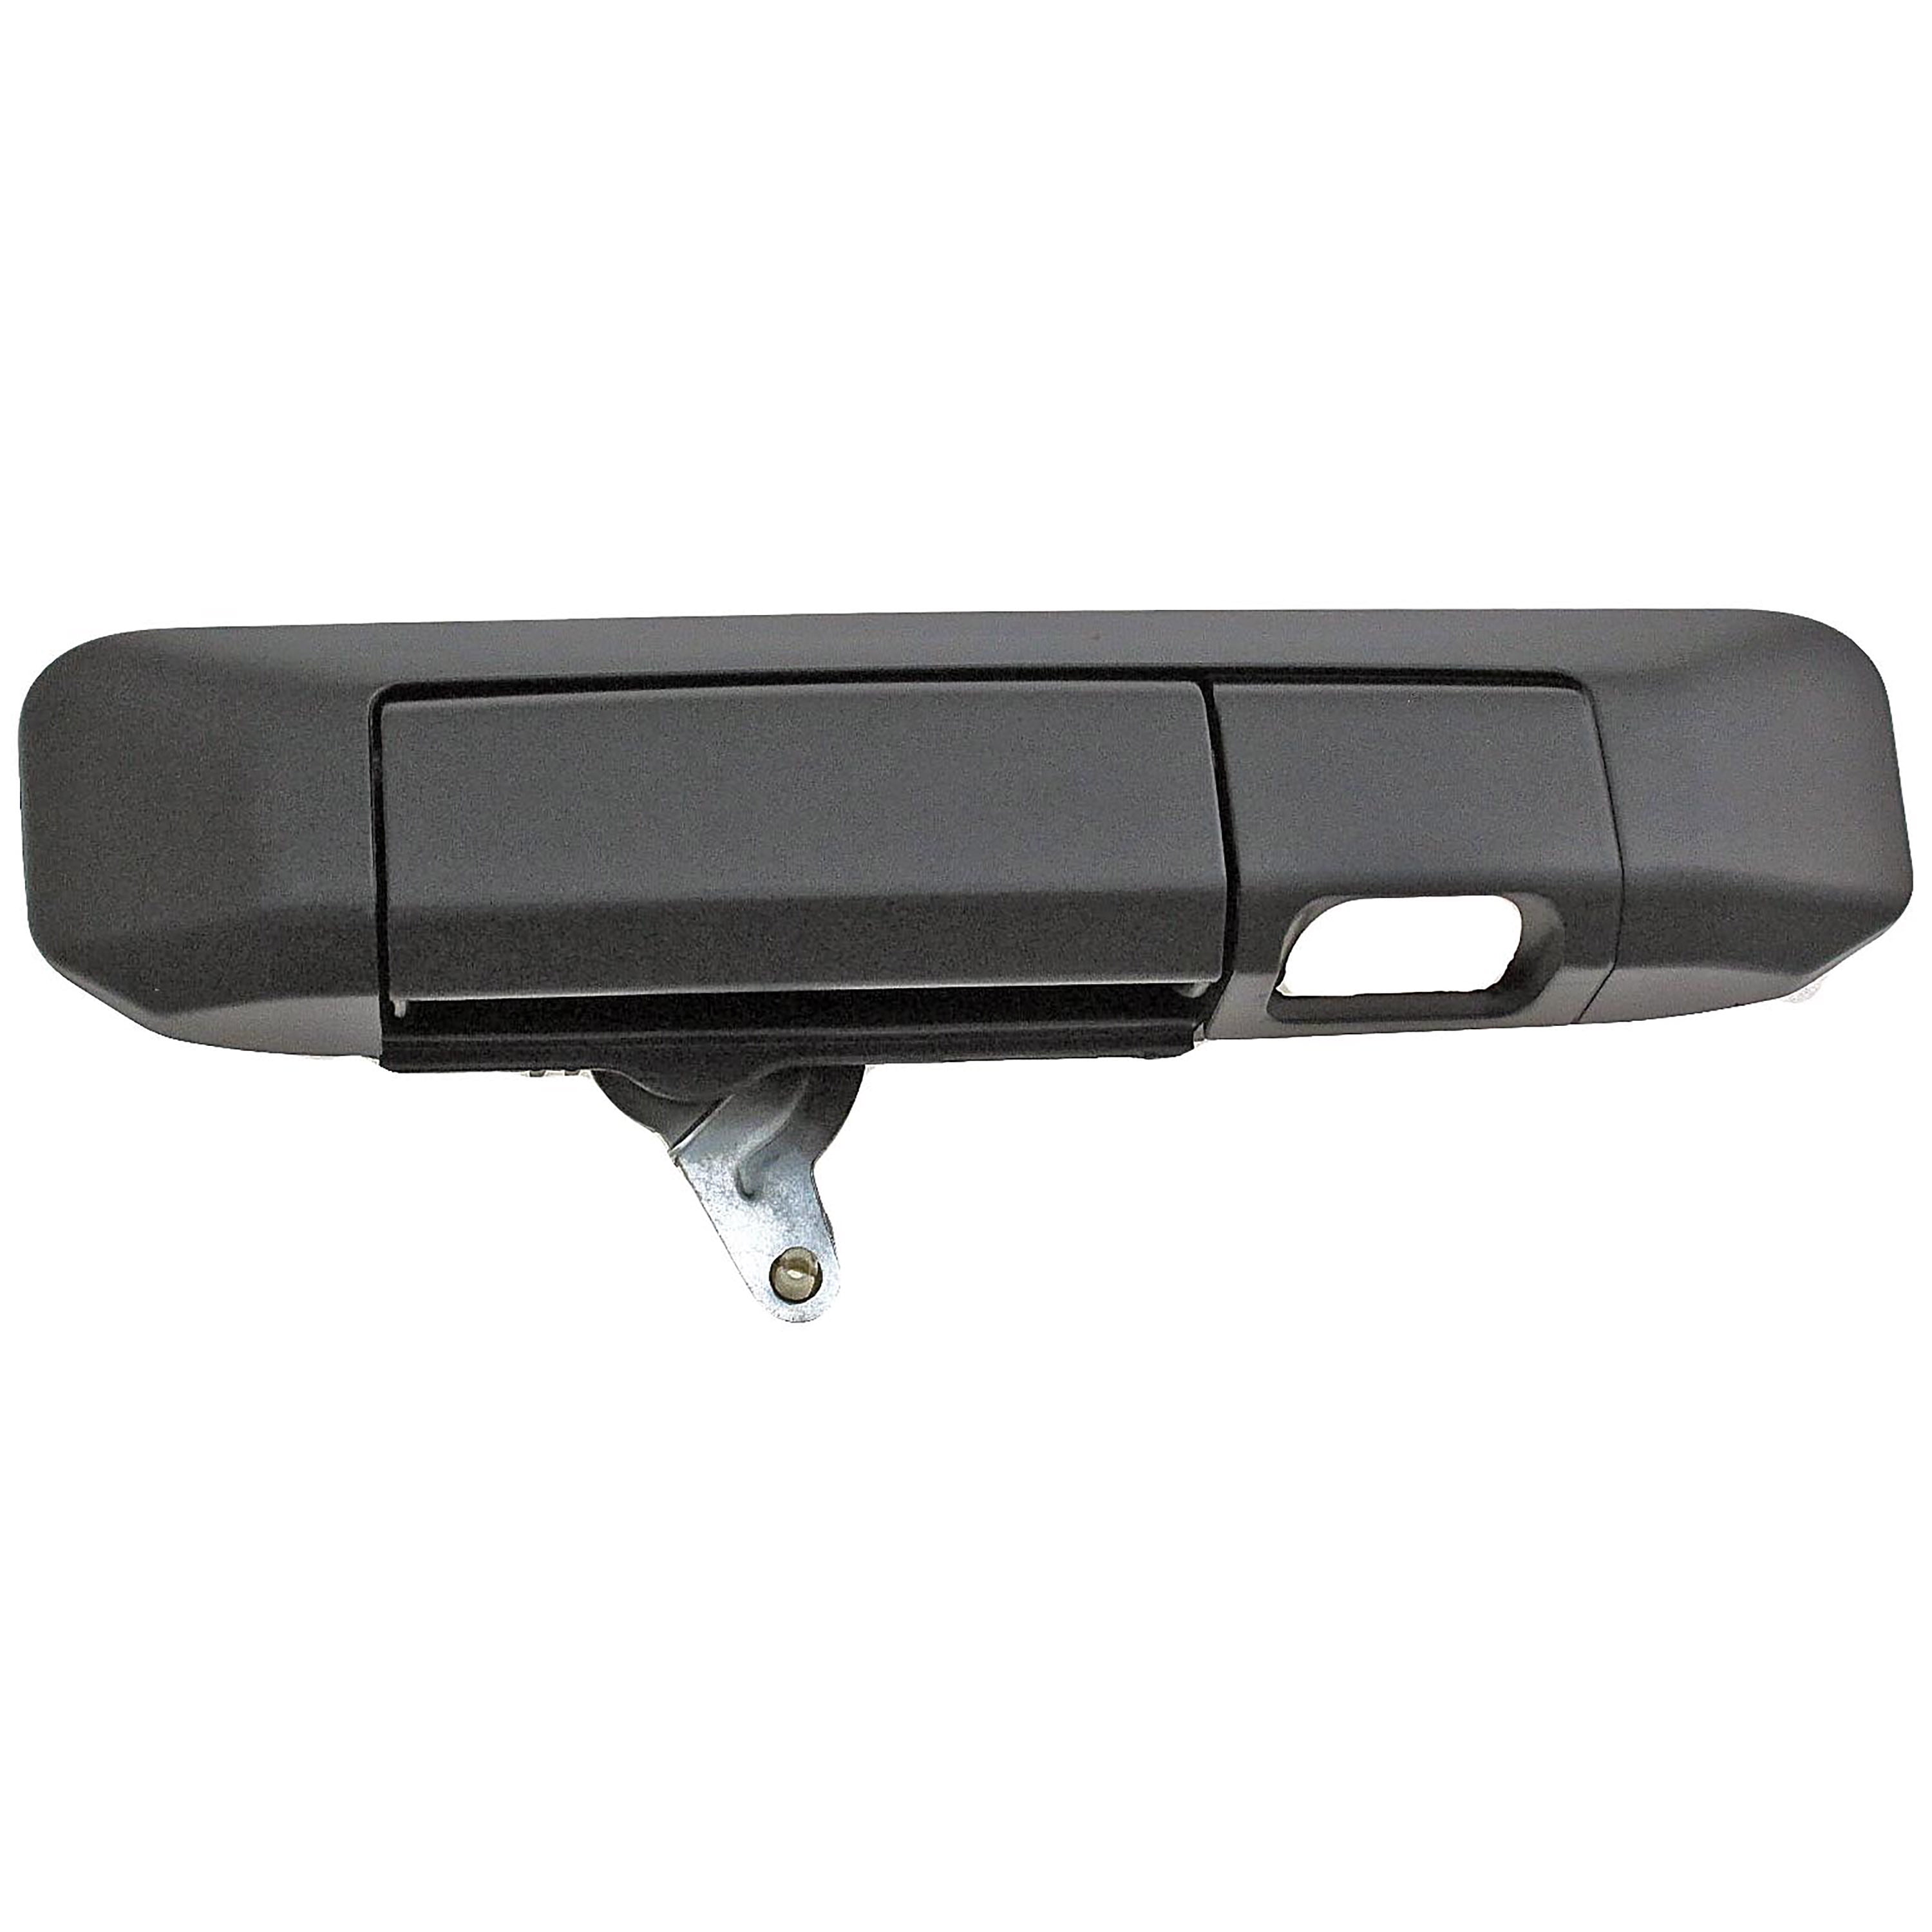 DORMAN 88188 Toyota Tacoma Black Replacement Tailgate Handle 